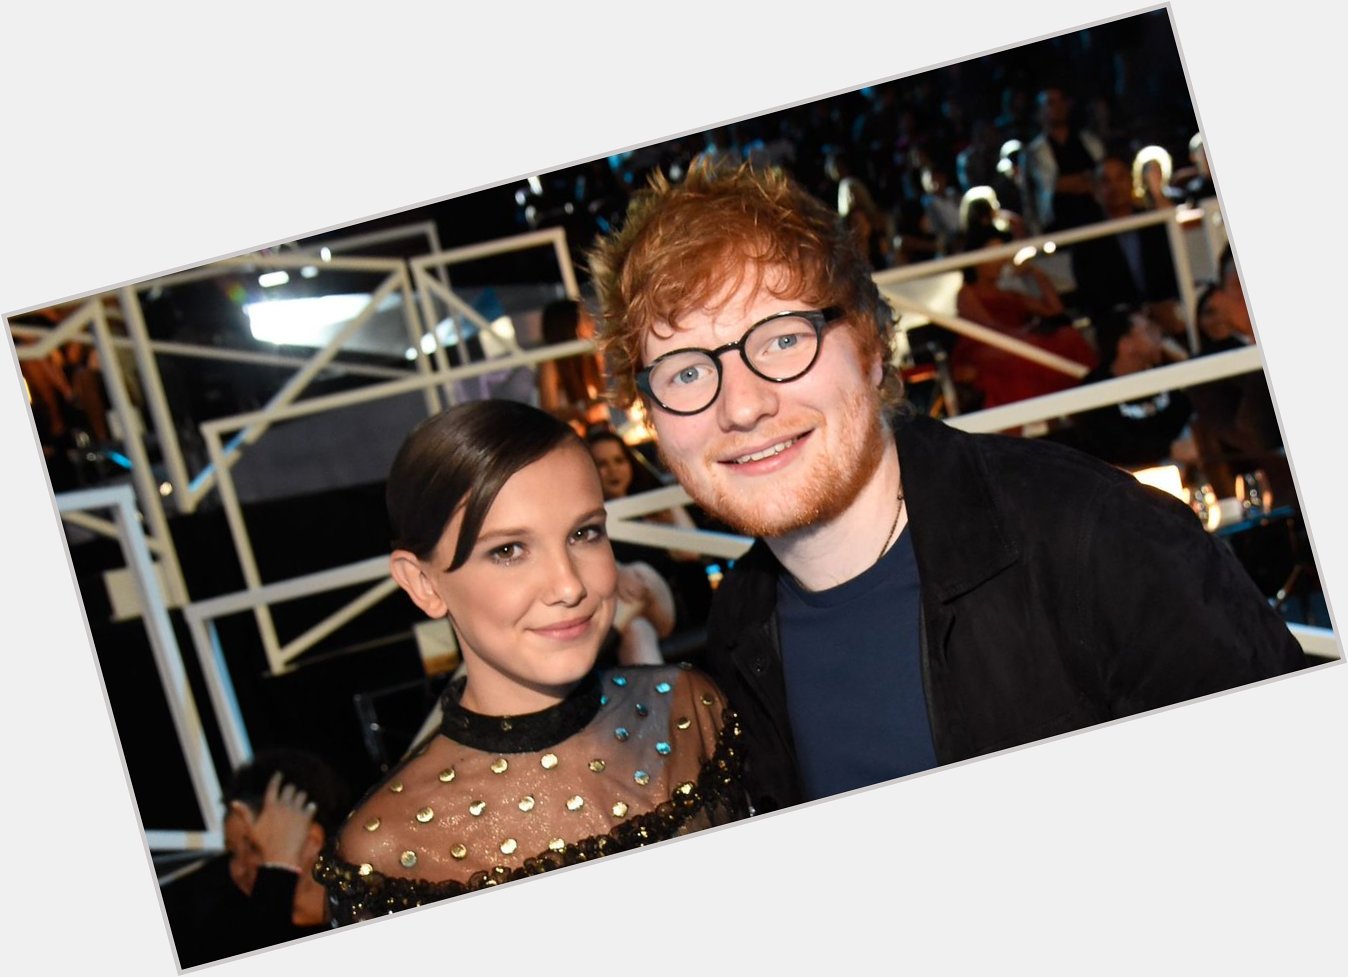 Millie Bobby Brown Wished Her Personal Favorite Ed Sheeran A Happy Birthday  